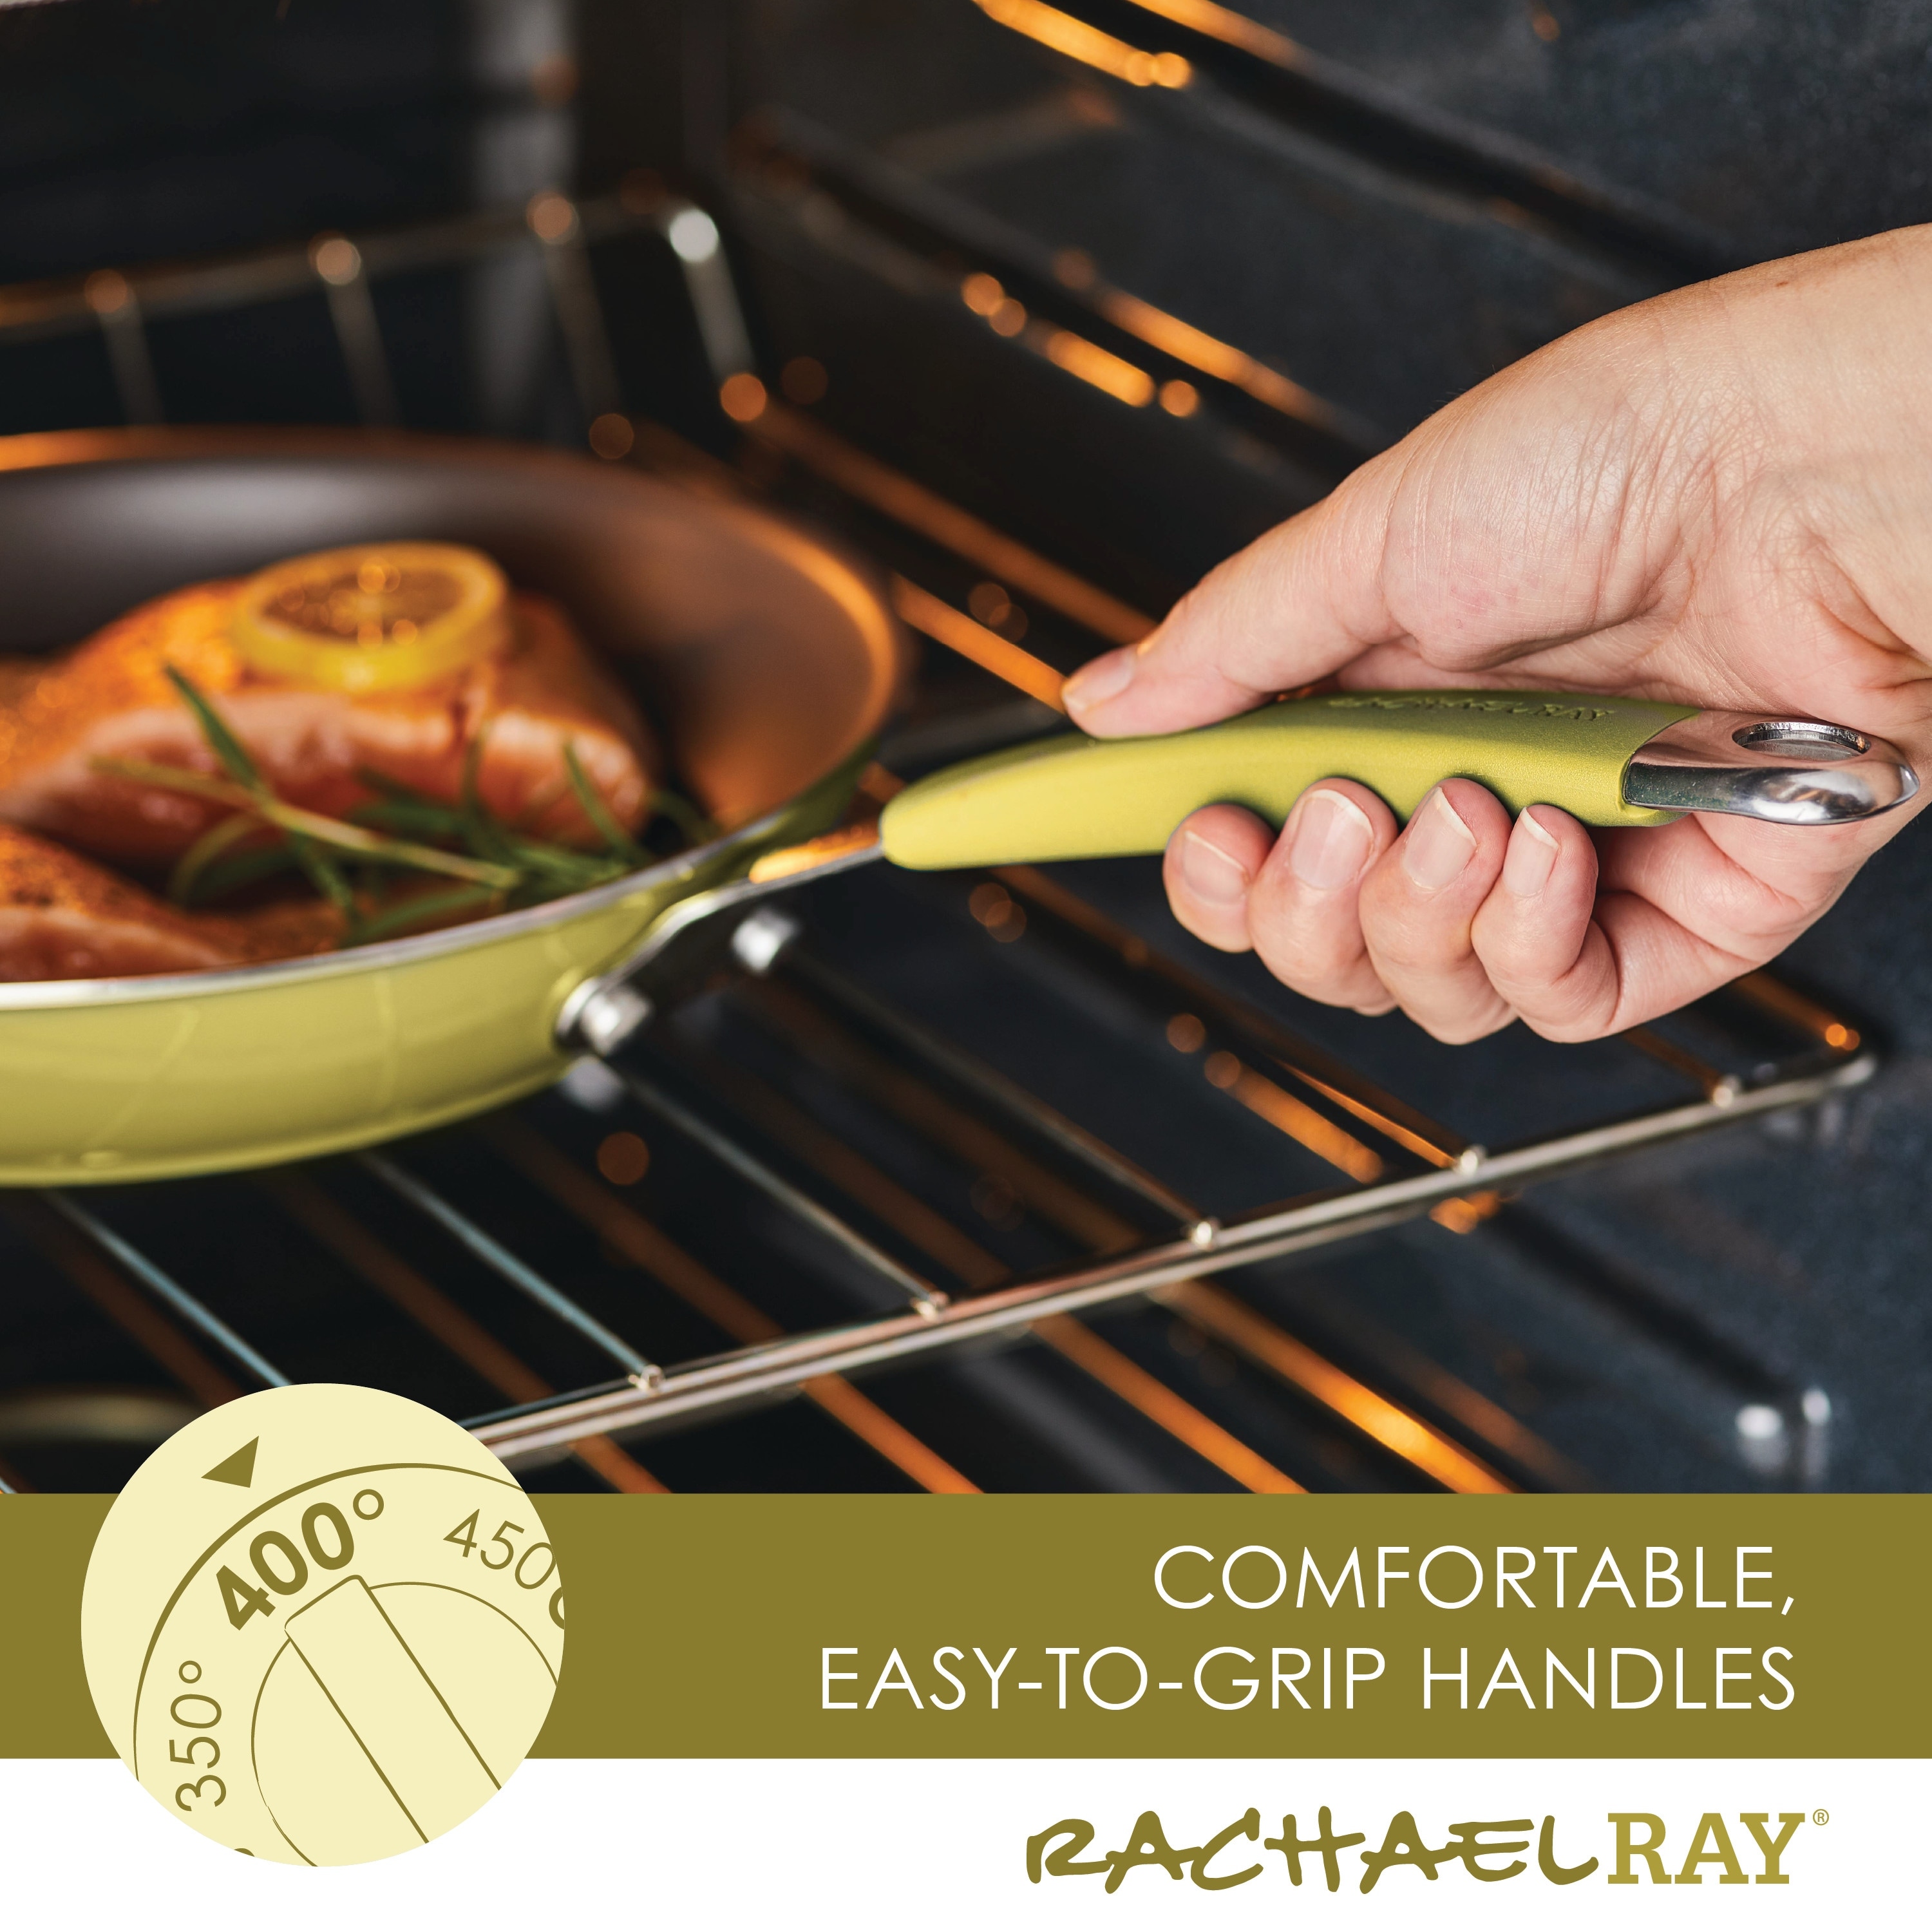 Rachael Ray Cucina Oven-To-Table Hard Enamel Nonstick 2-1/2-quart Covered  Round Casserole - Bed Bath & Beyond - 9216695